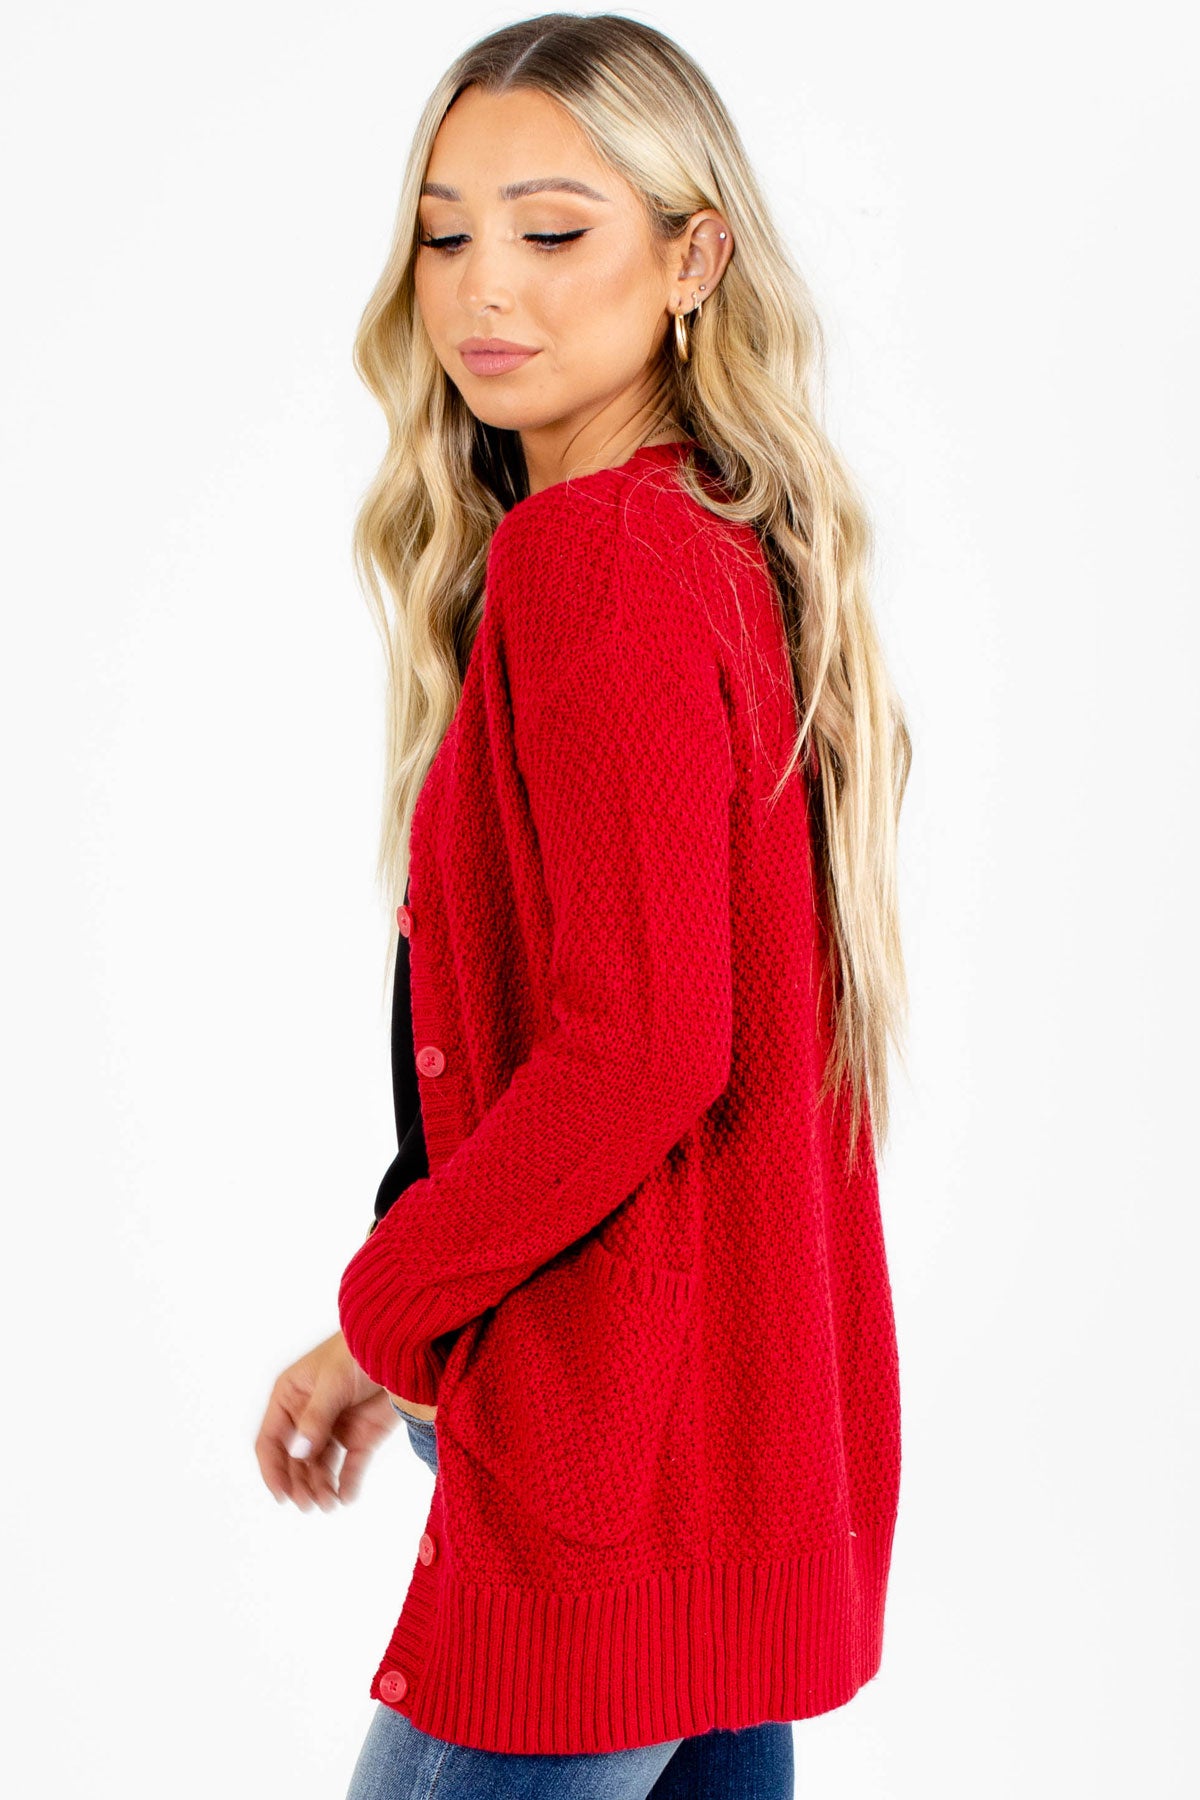 Red Cozy Cardigan with pockets for Women